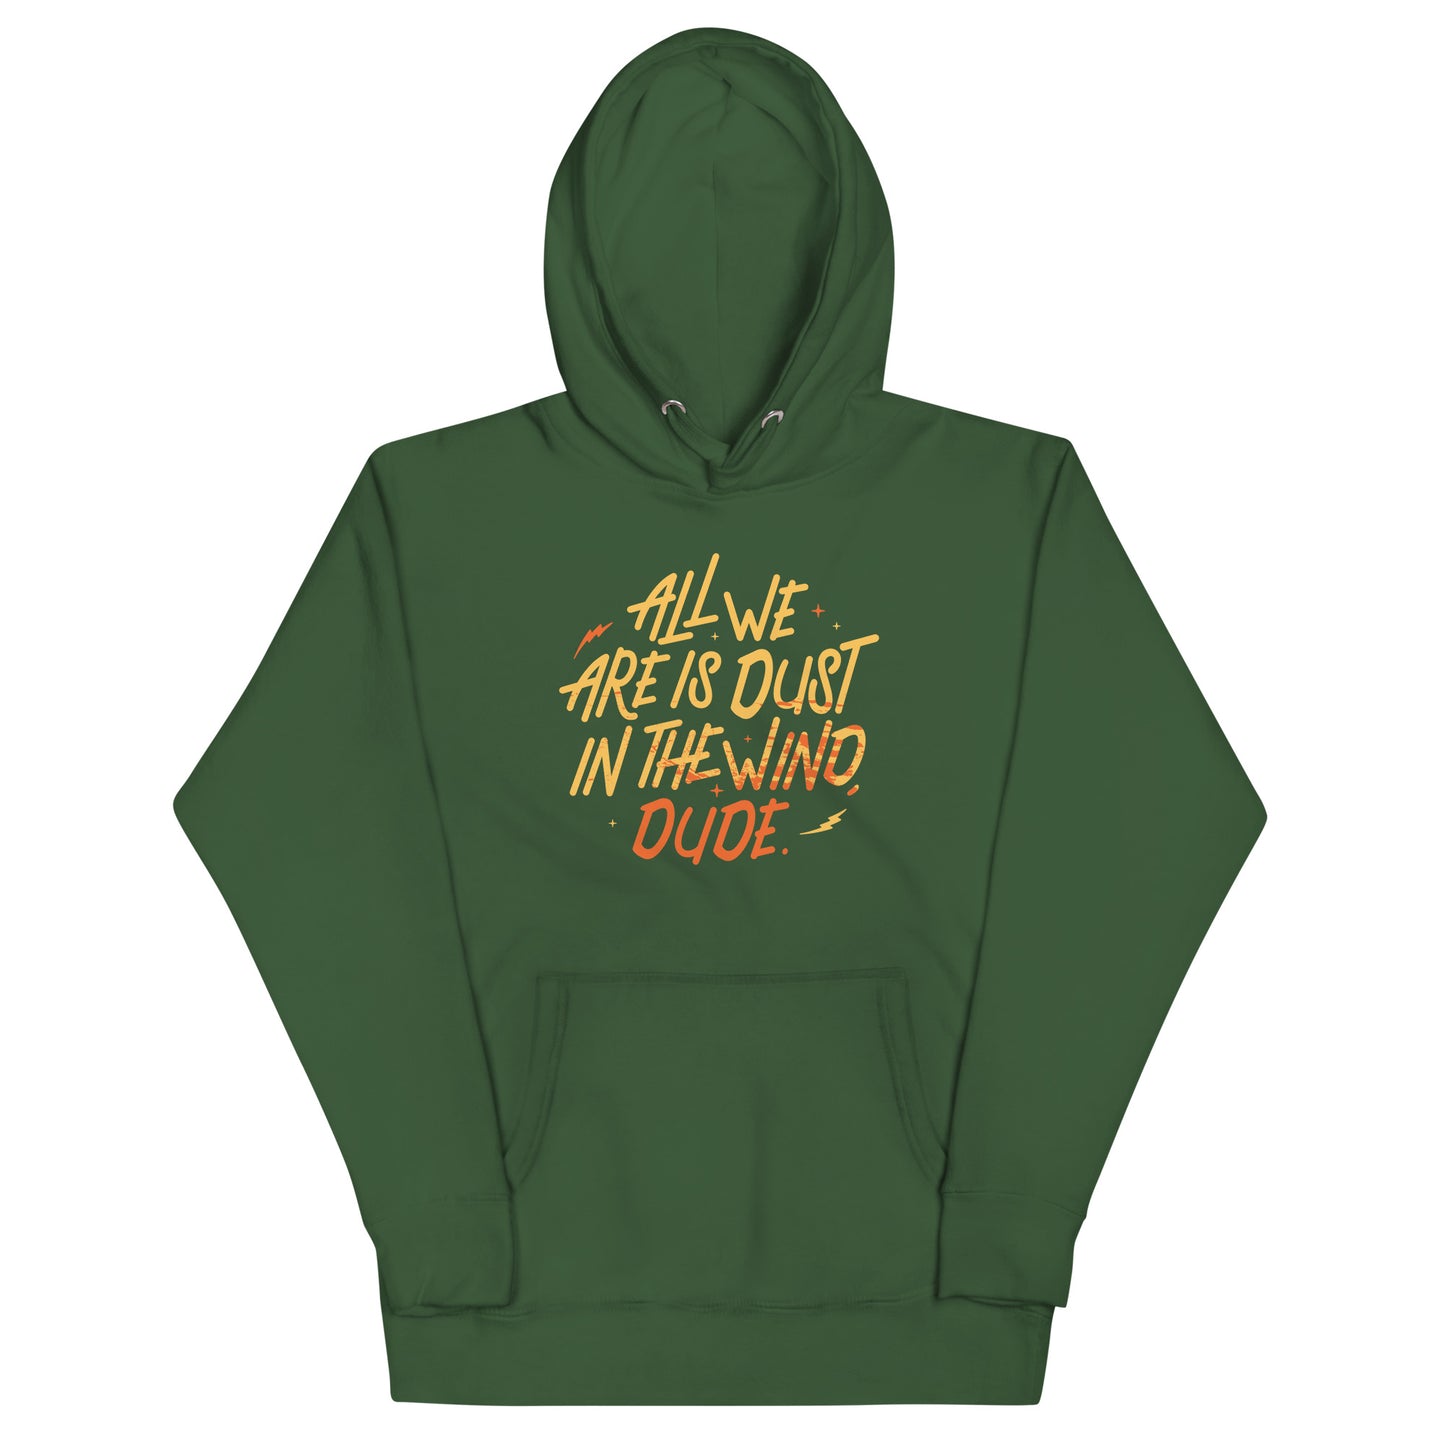 All We Are Is Dust In The Wind, Dude Unisex Hoodie